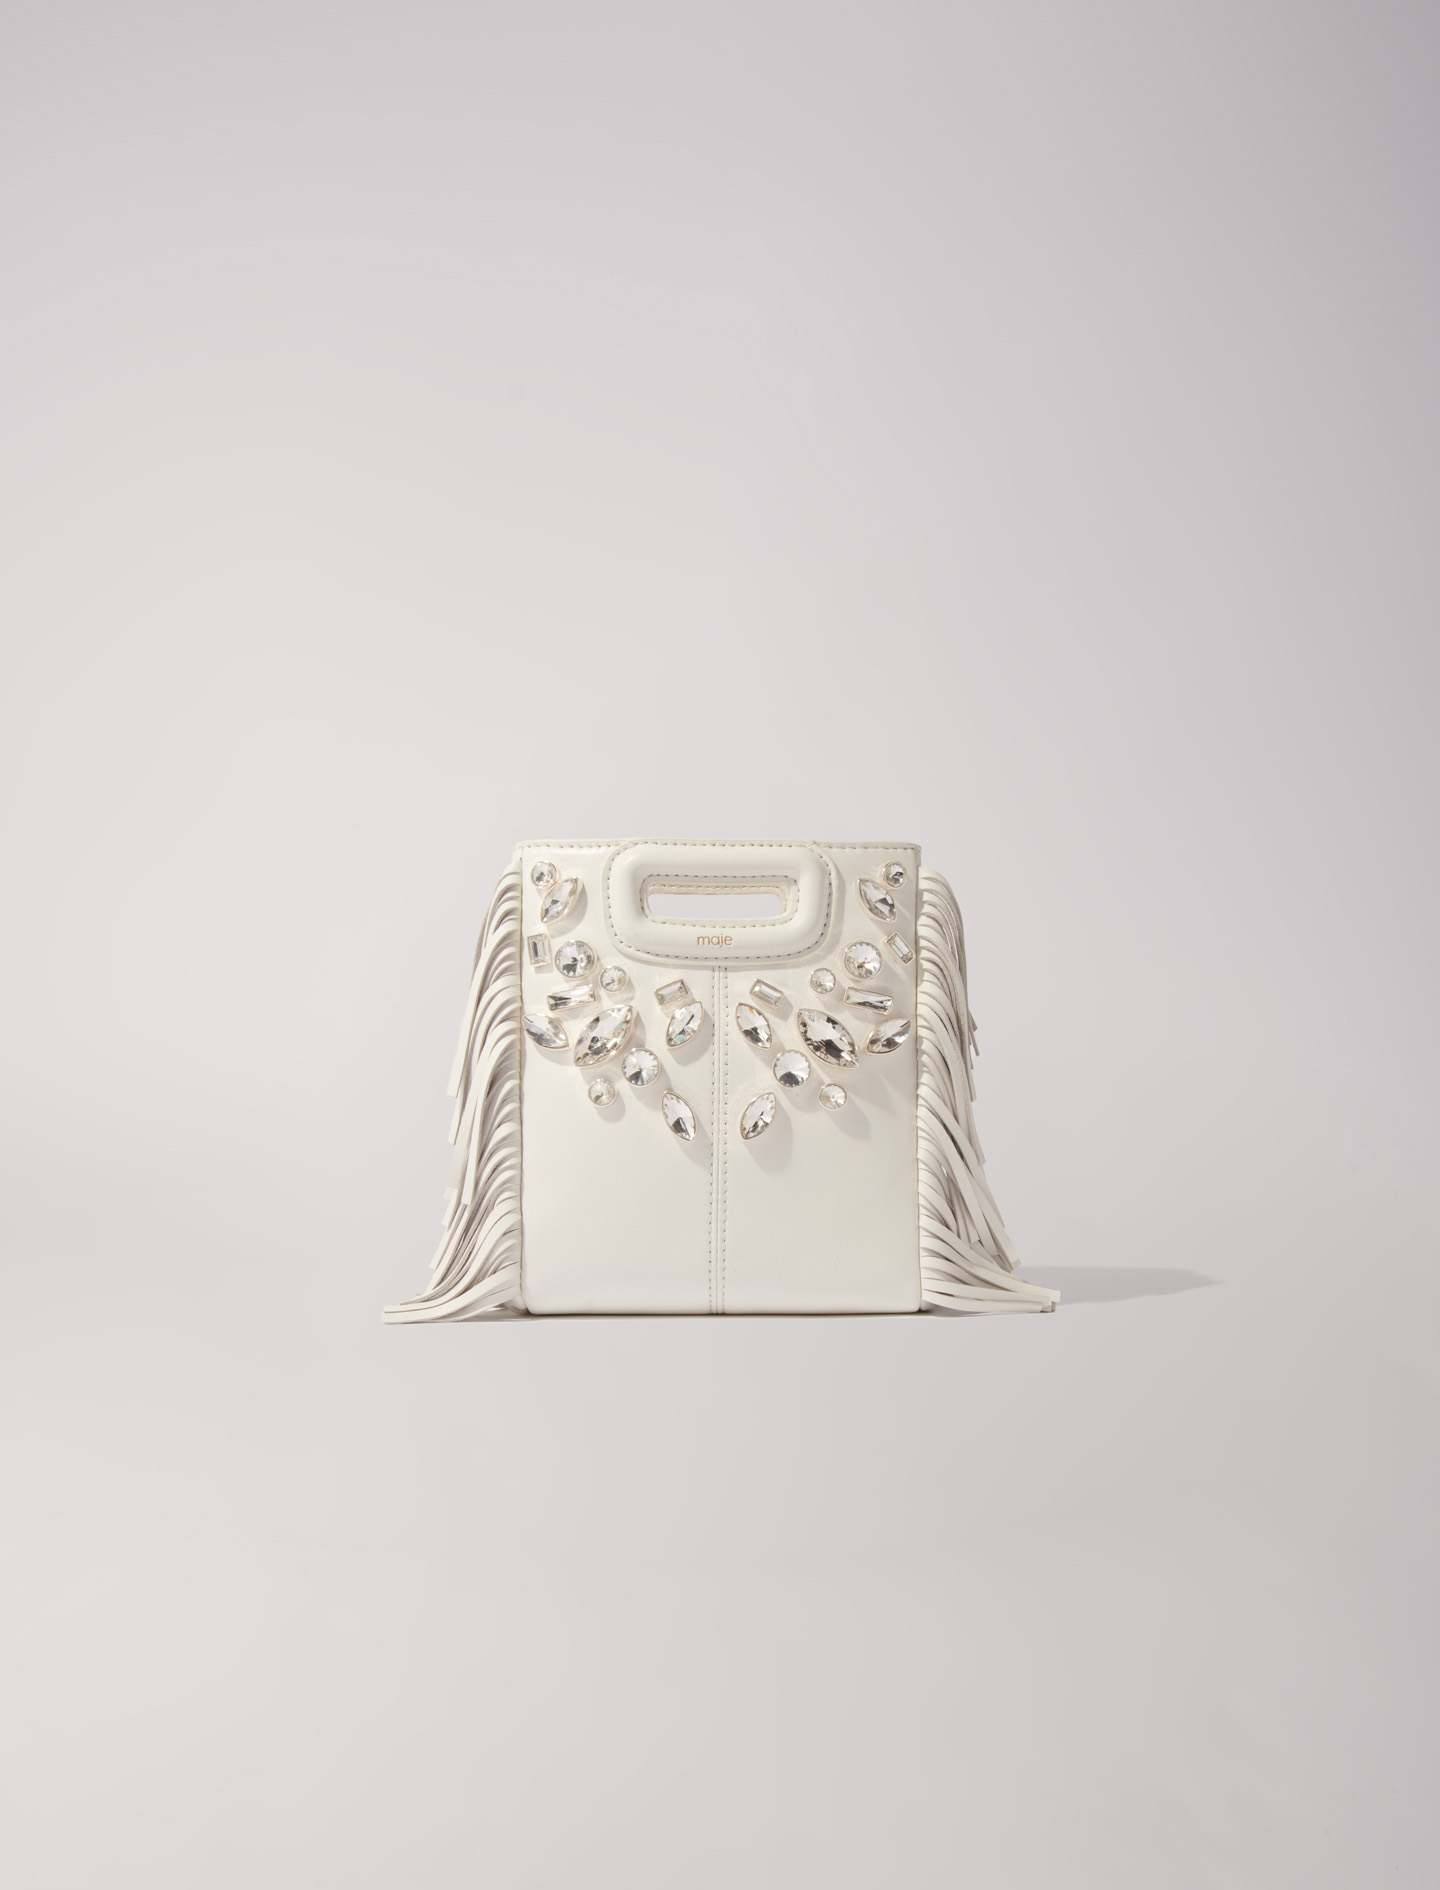 Woman's polyester Diamante: M mini leather bag with diamantés for Fall/Winter, size Woman-All Bags-OS (ONE SIZE), in color White / White